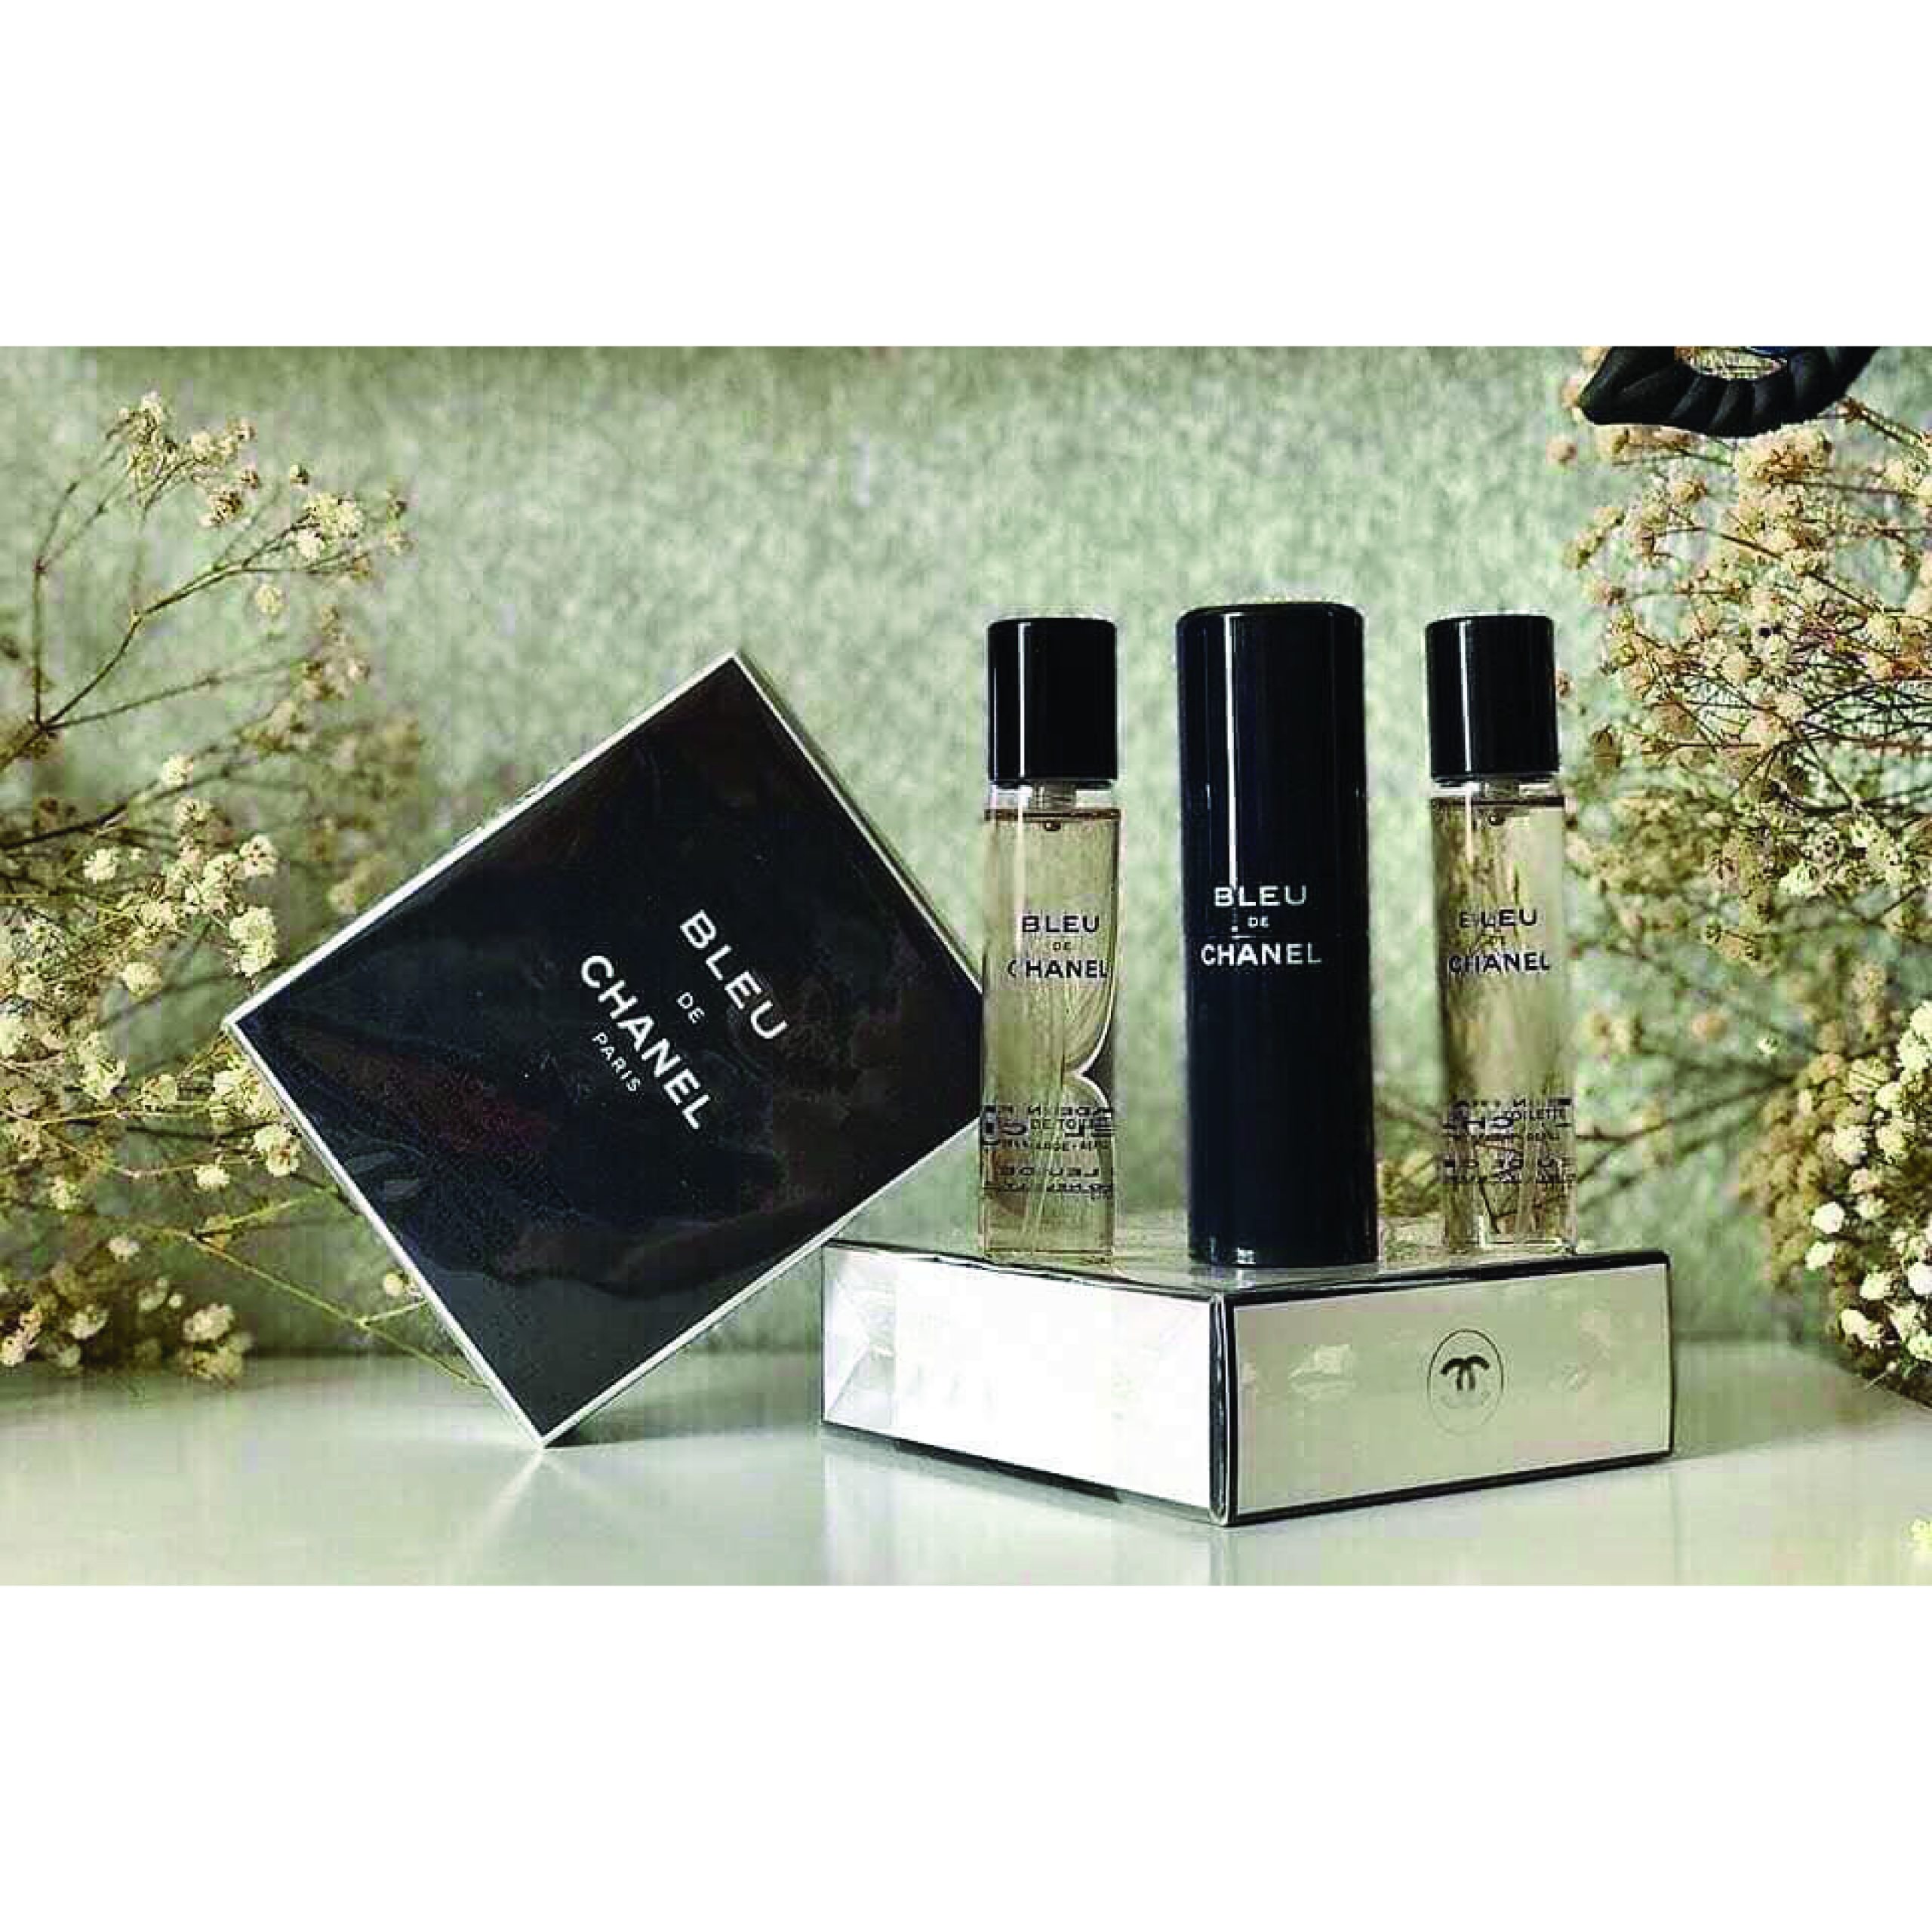 Chanel No 5 Gift Set 12 stores  See at PriceRunner 